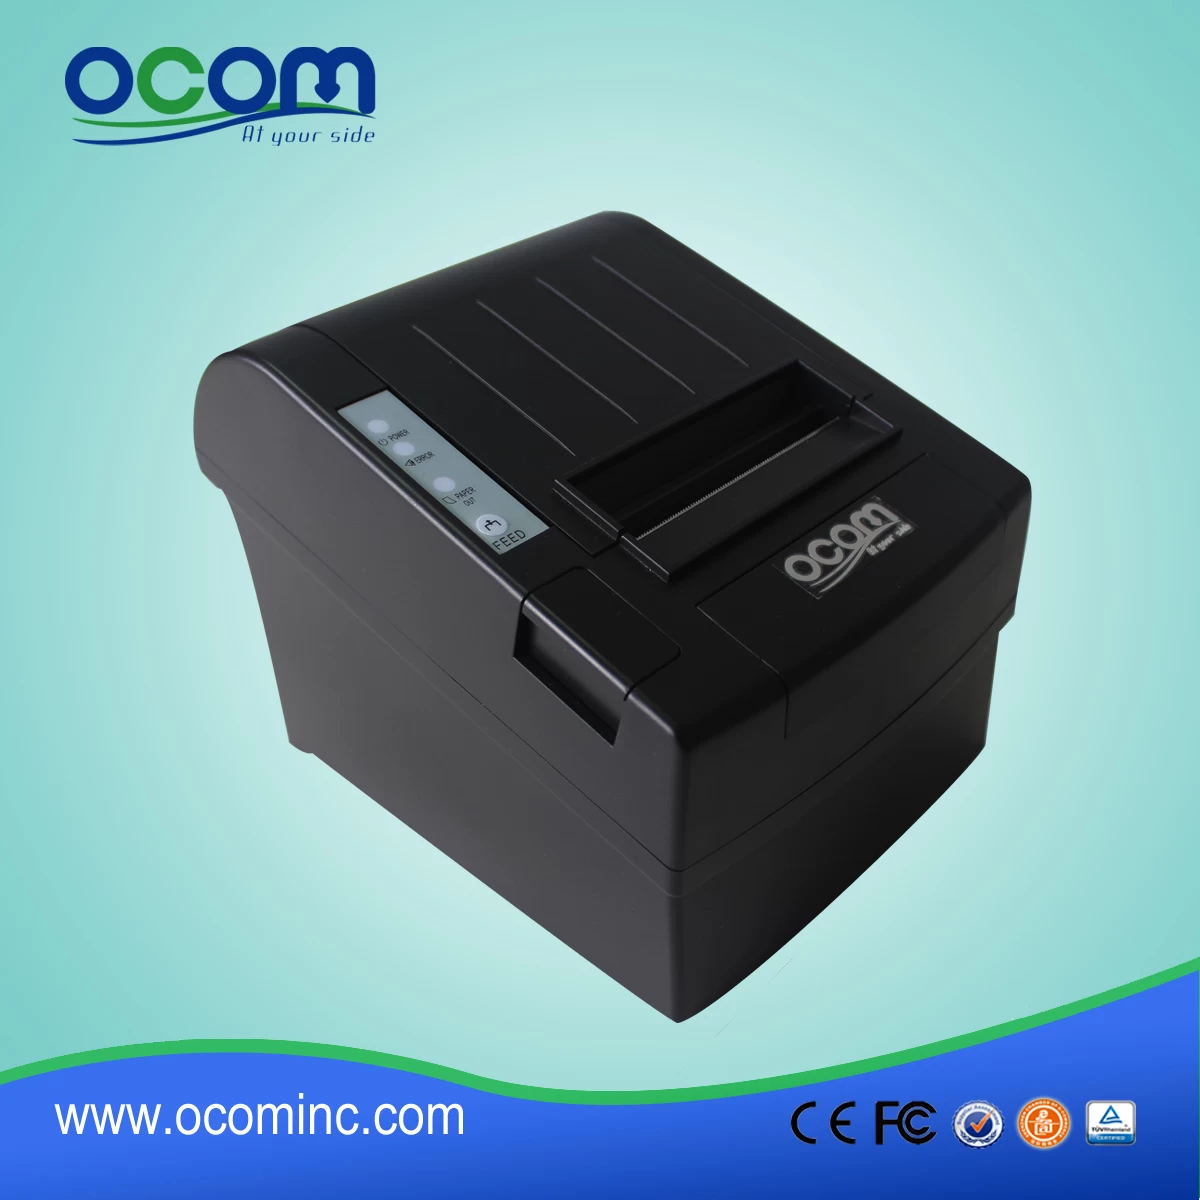 80mm Auto Cutter POS Thermal Receipt Printer